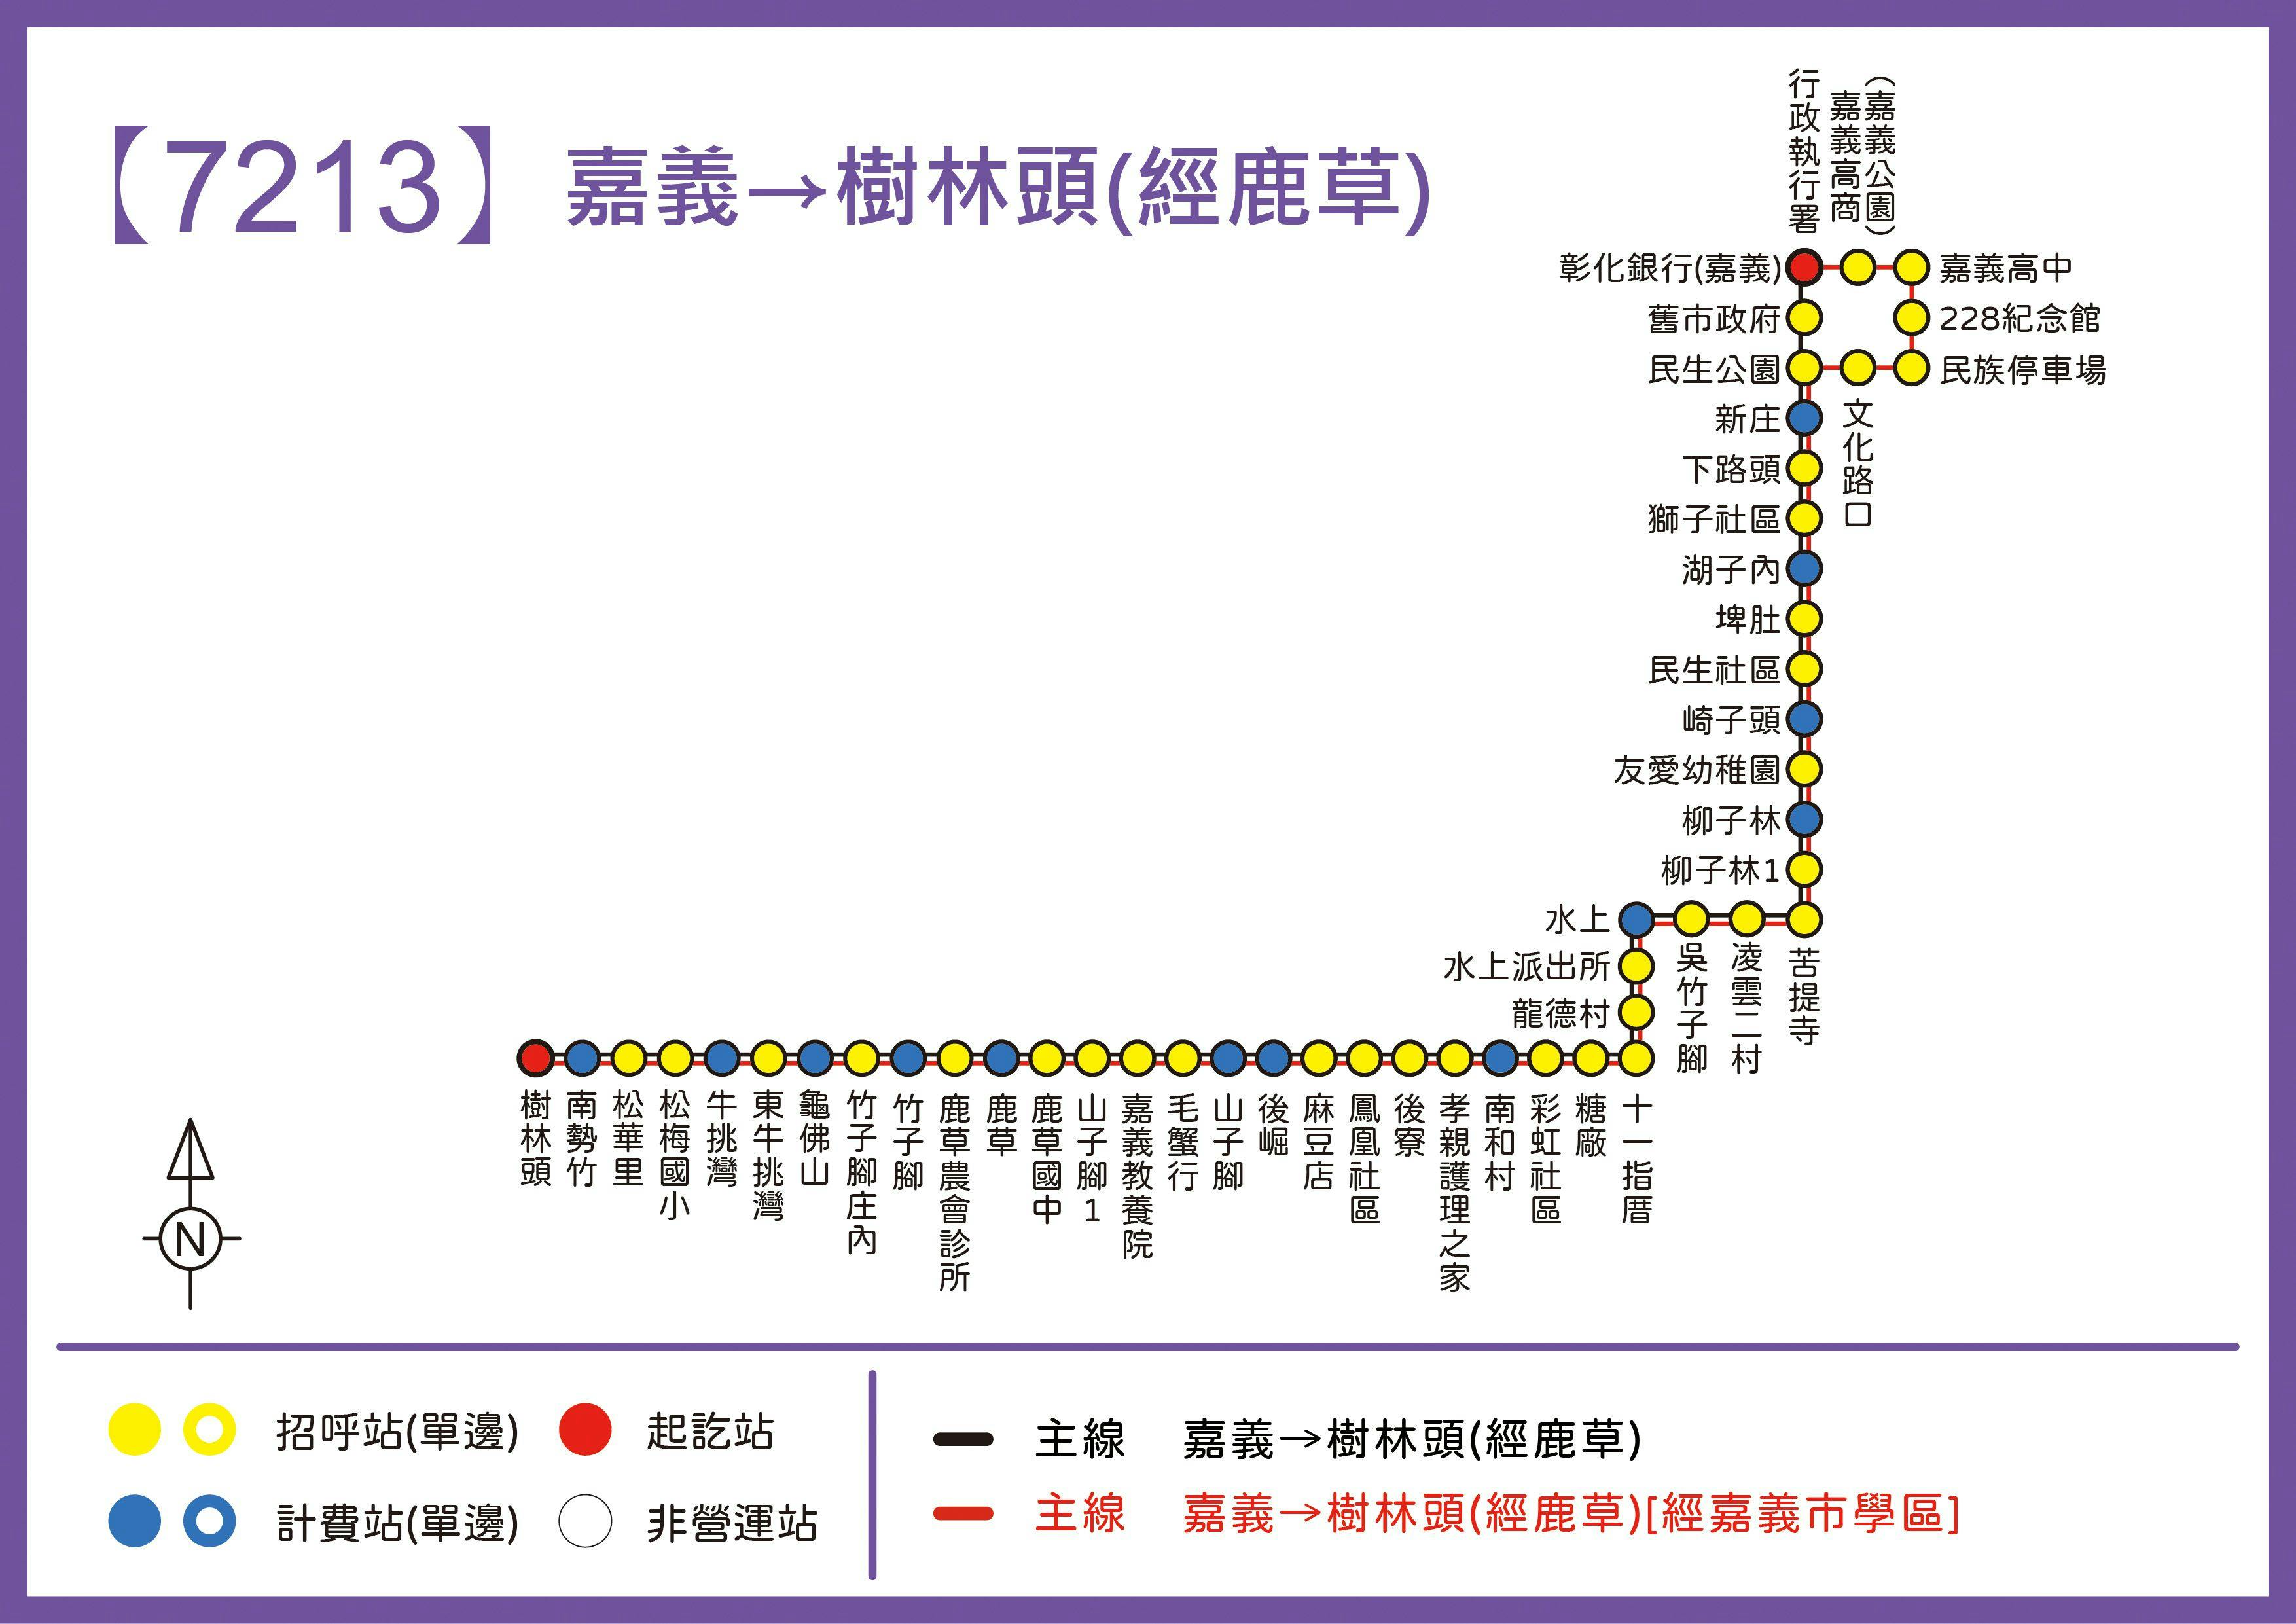 7213Route Map-Chiayi Bus